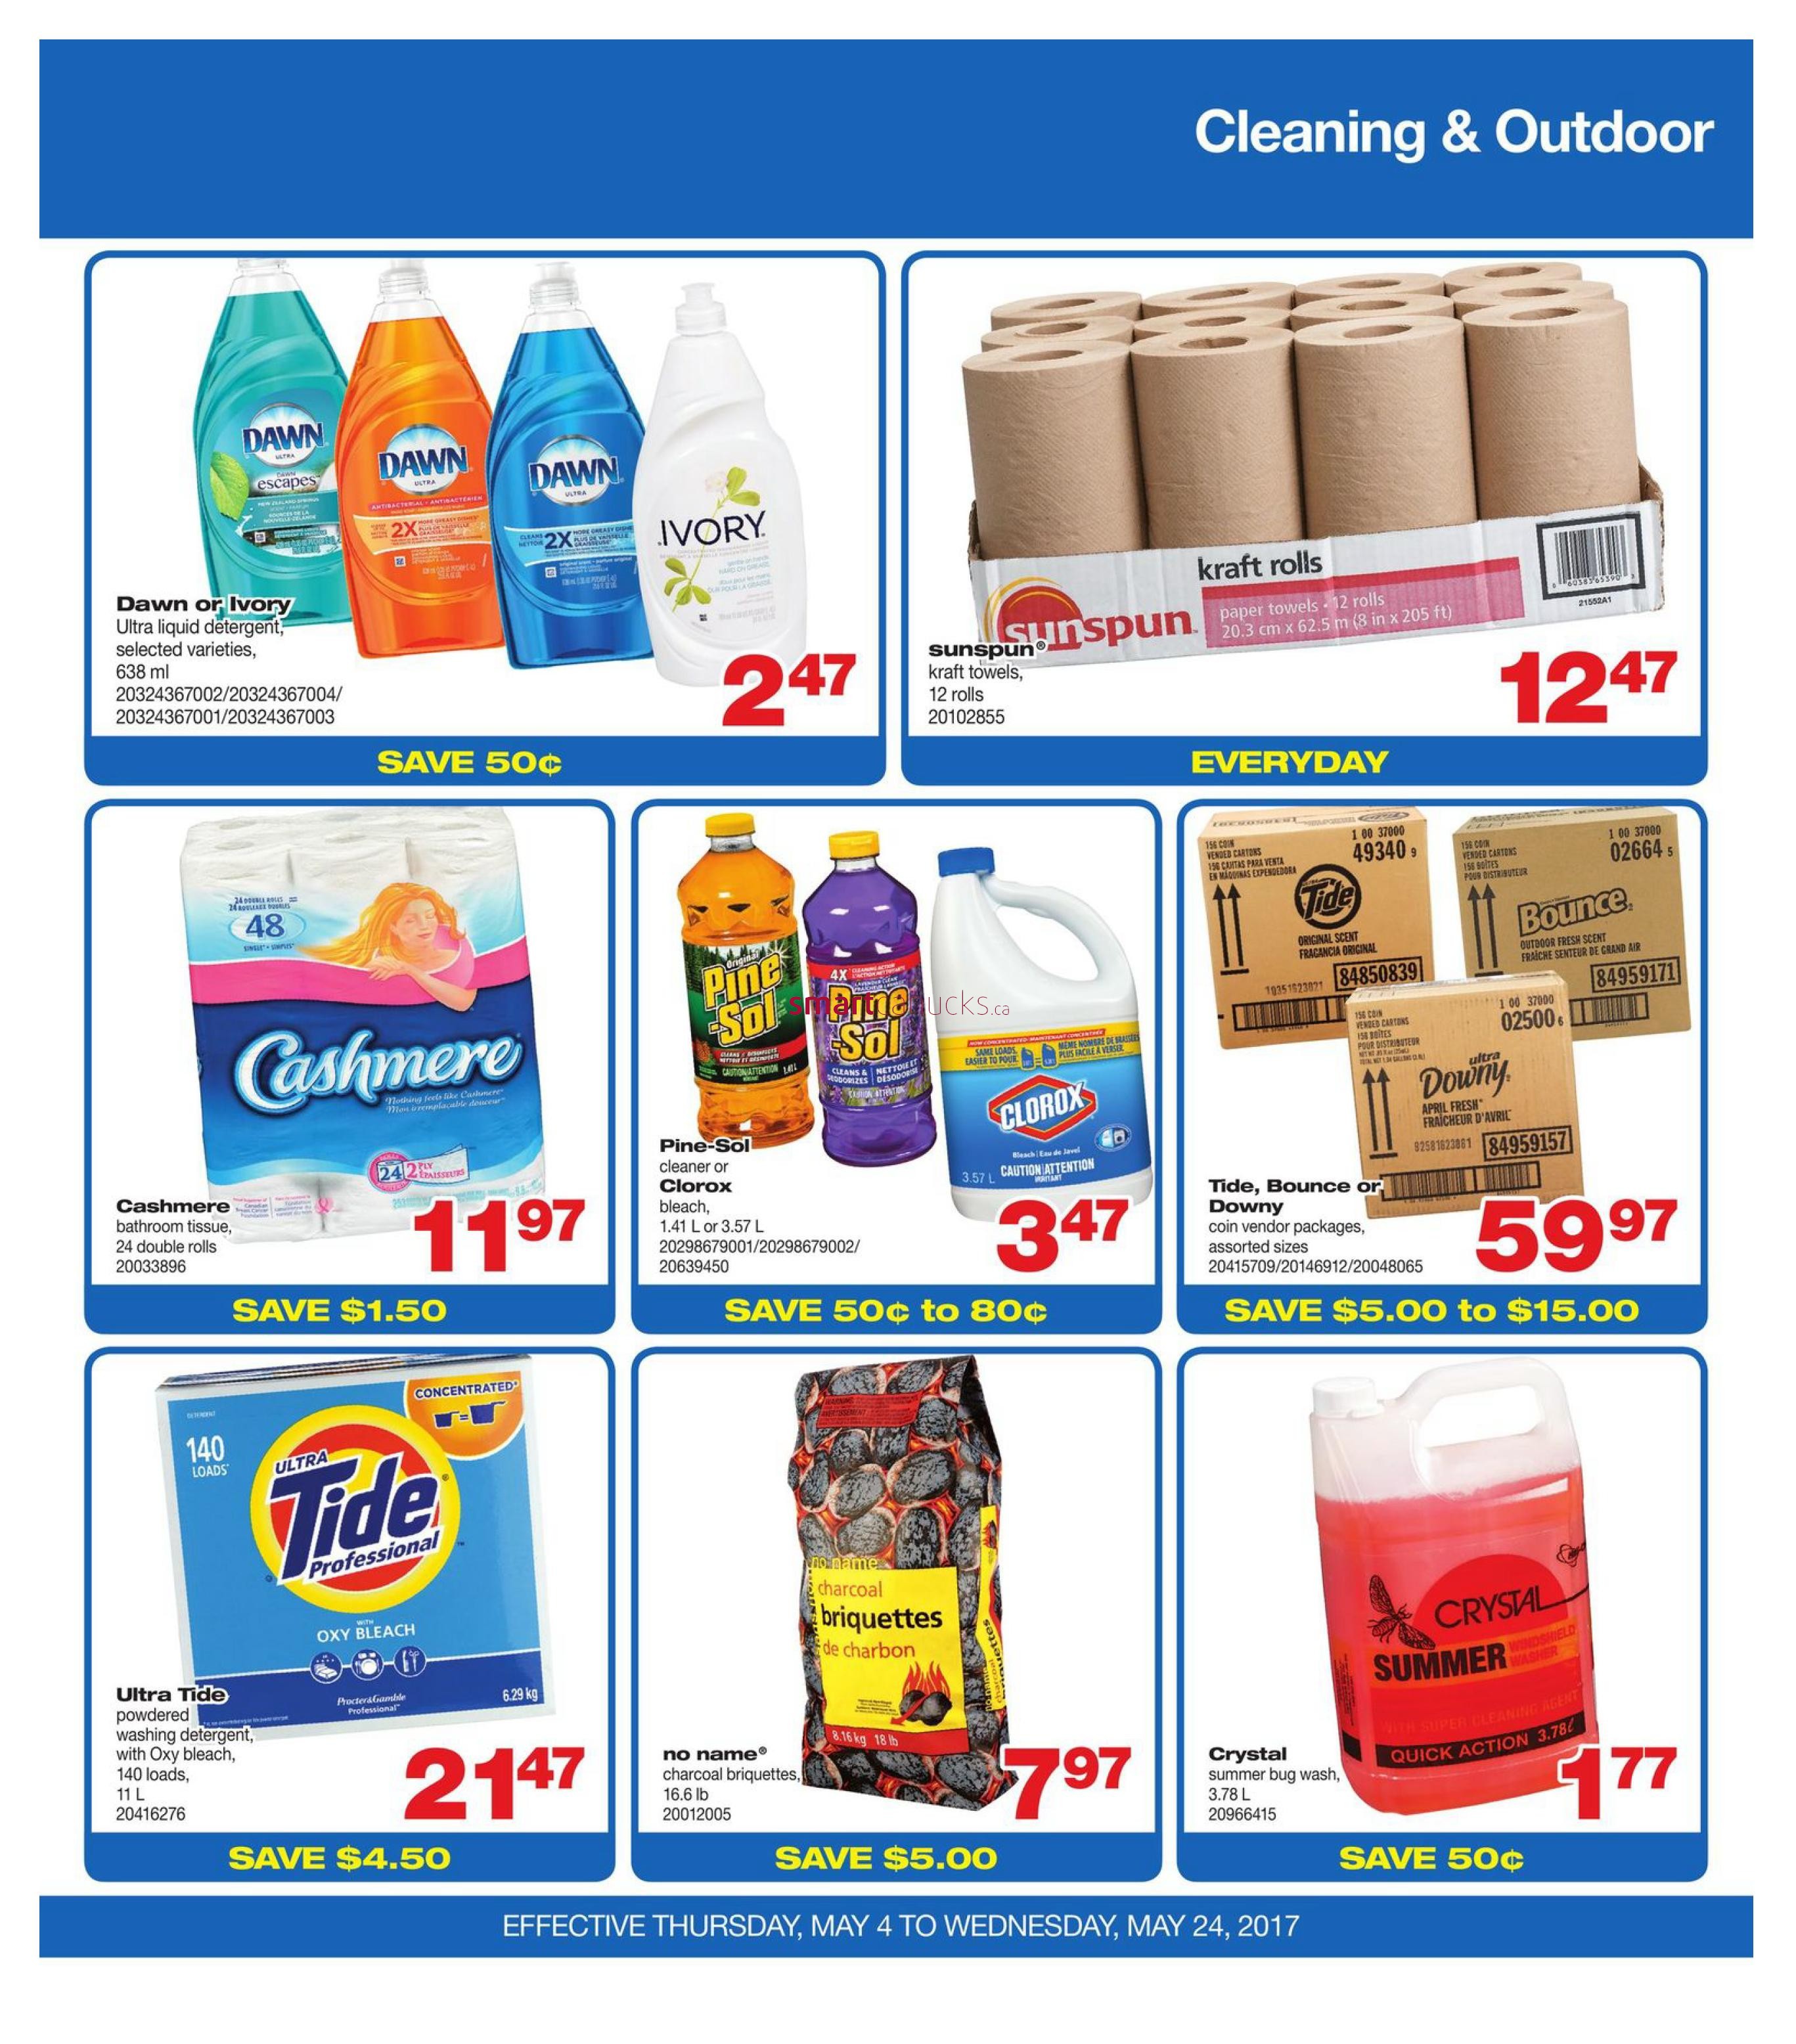 Wholesale Club On Flyer May 4 To 24 15 